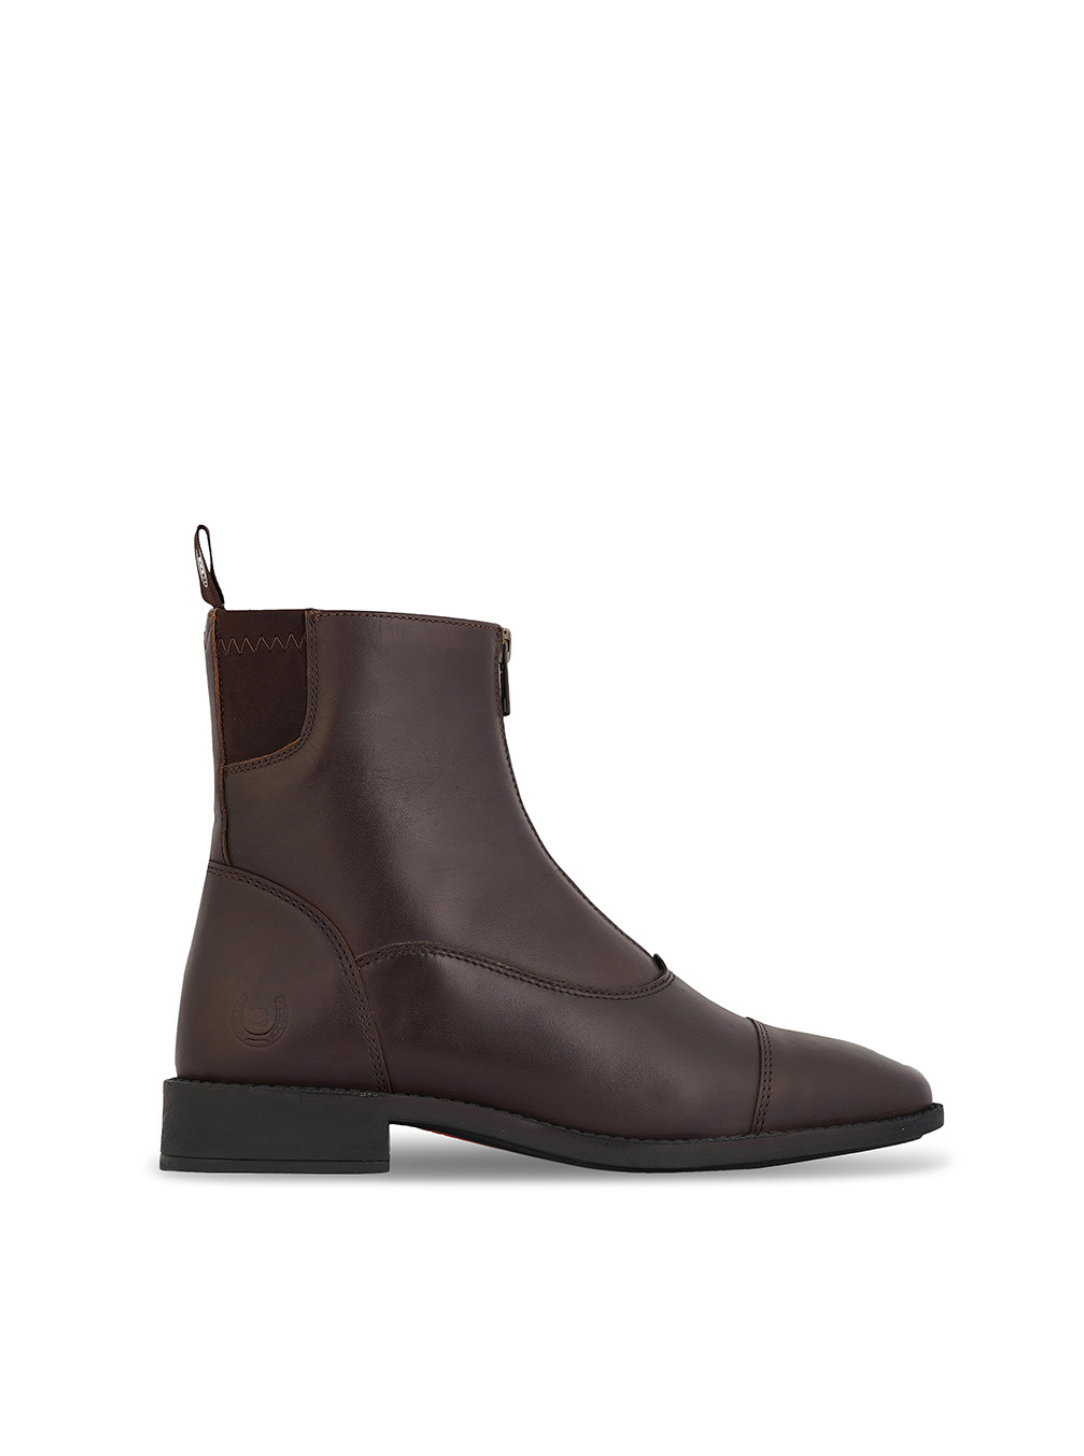 SHIRE- Front zipper, Ankle riding boots. 